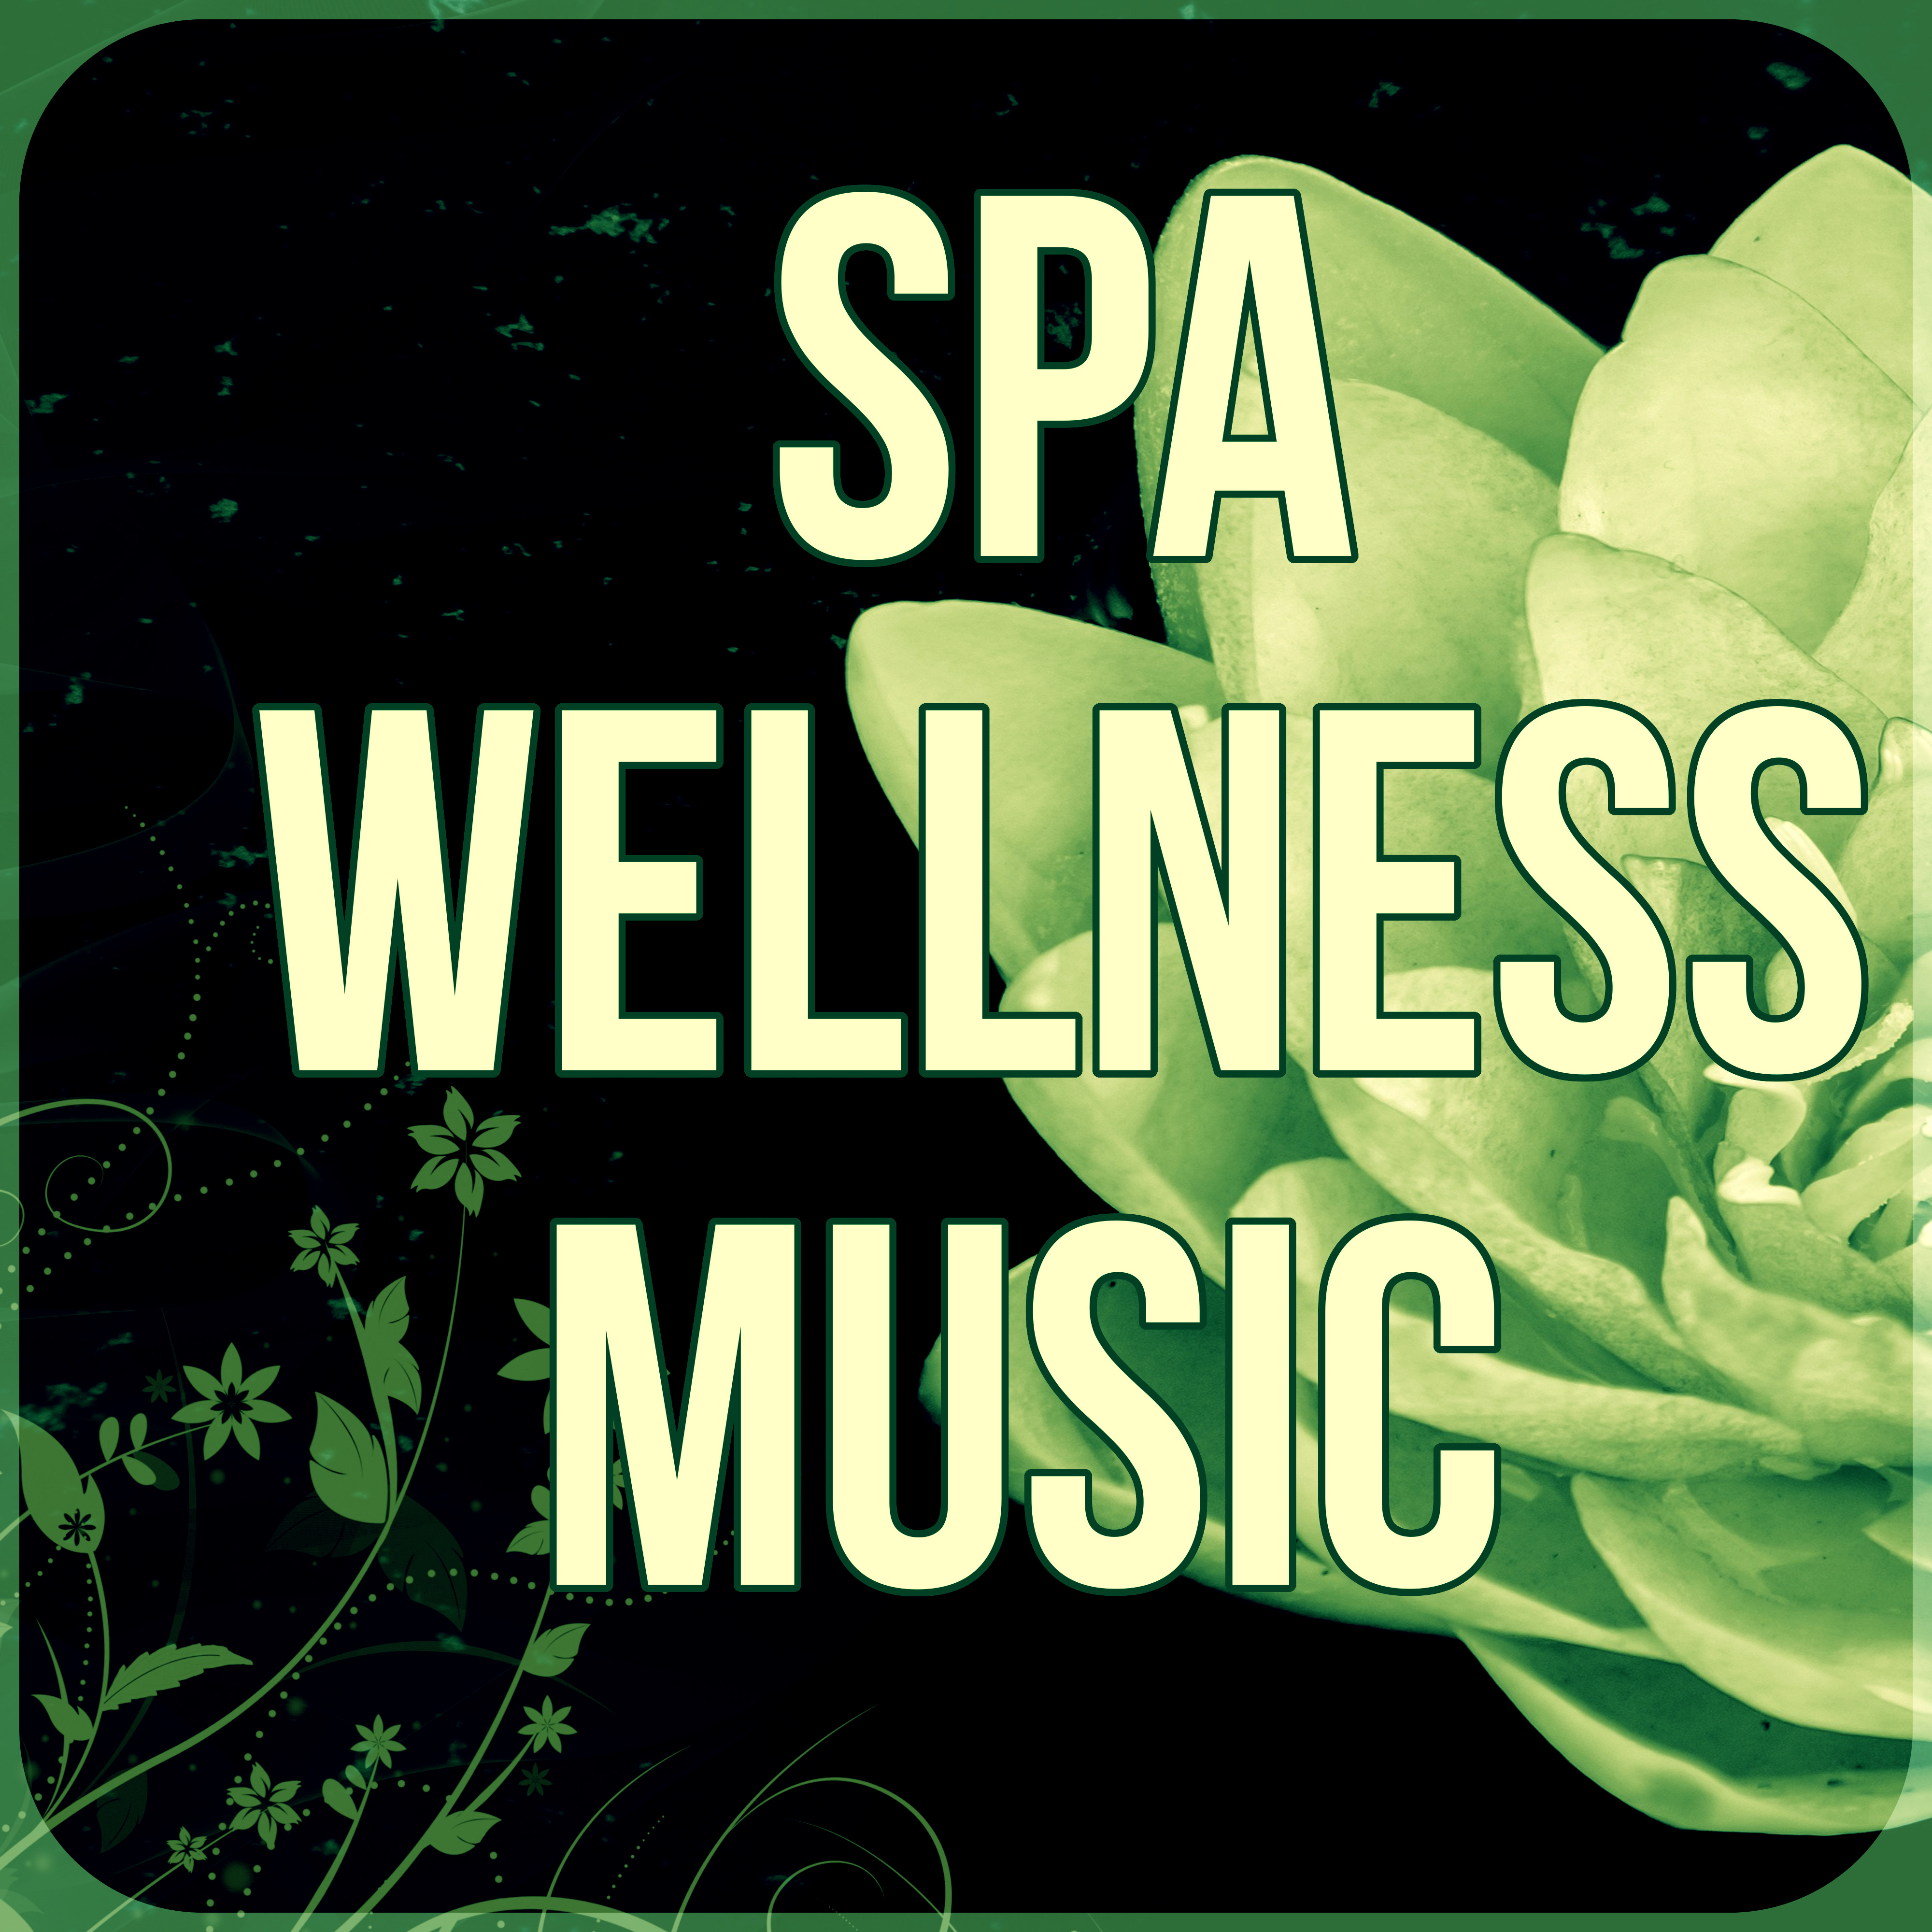 Spa Wellness Music – New Age Music for Massage, Music Therapy, Ocean Waves, Hydro Energy Body Massage, First Class, Aromatherapy, Wellness, Well-Being